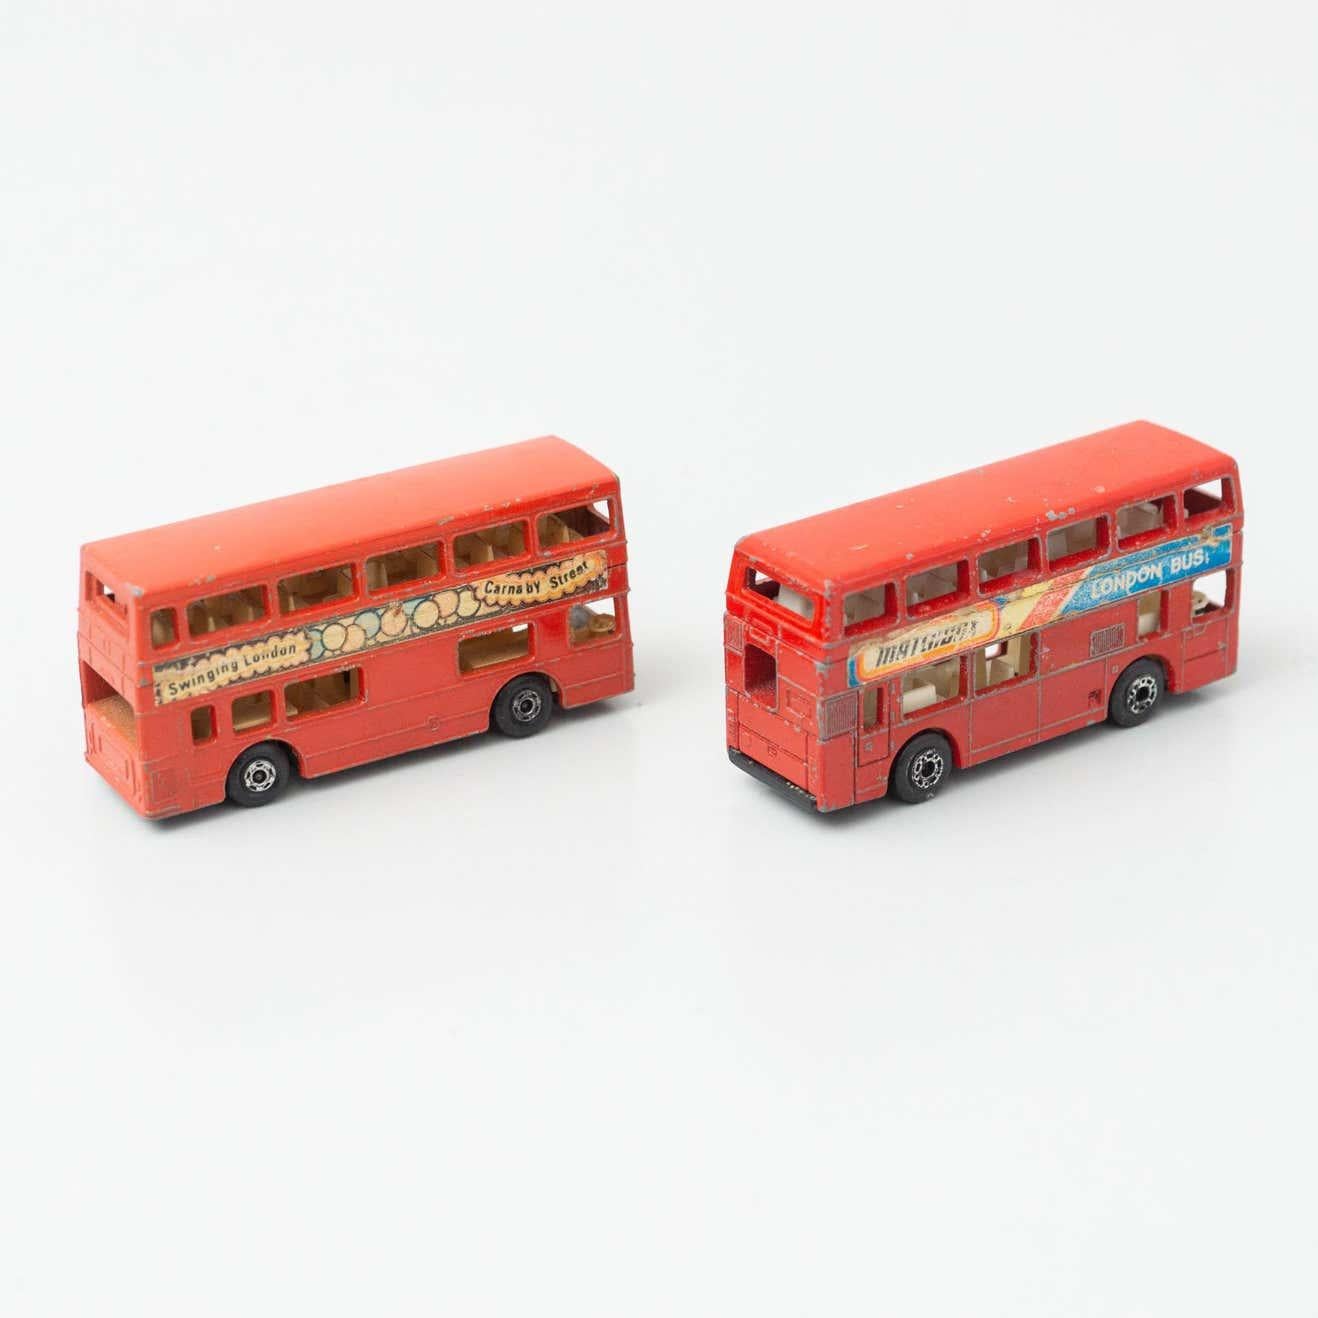 French Set of Two Vintage London Bus Match Box Car Toys, circa 1960 For Sale